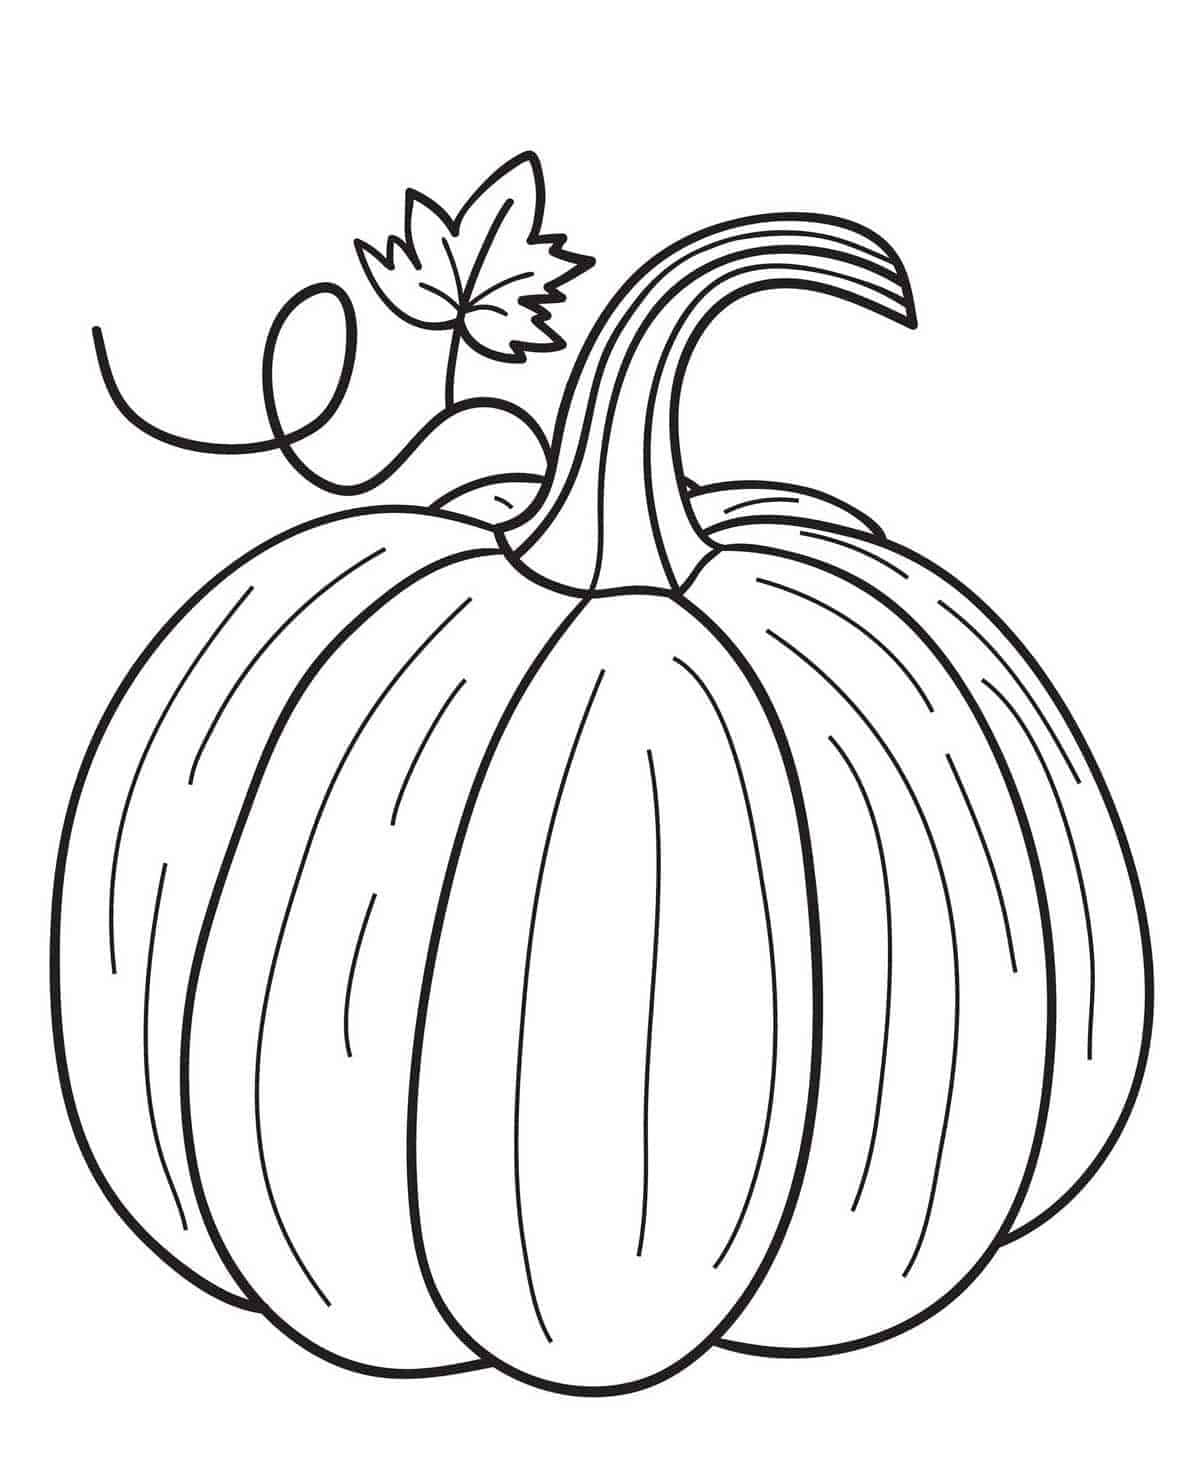 Get Creative with these Fall Coloring Pages